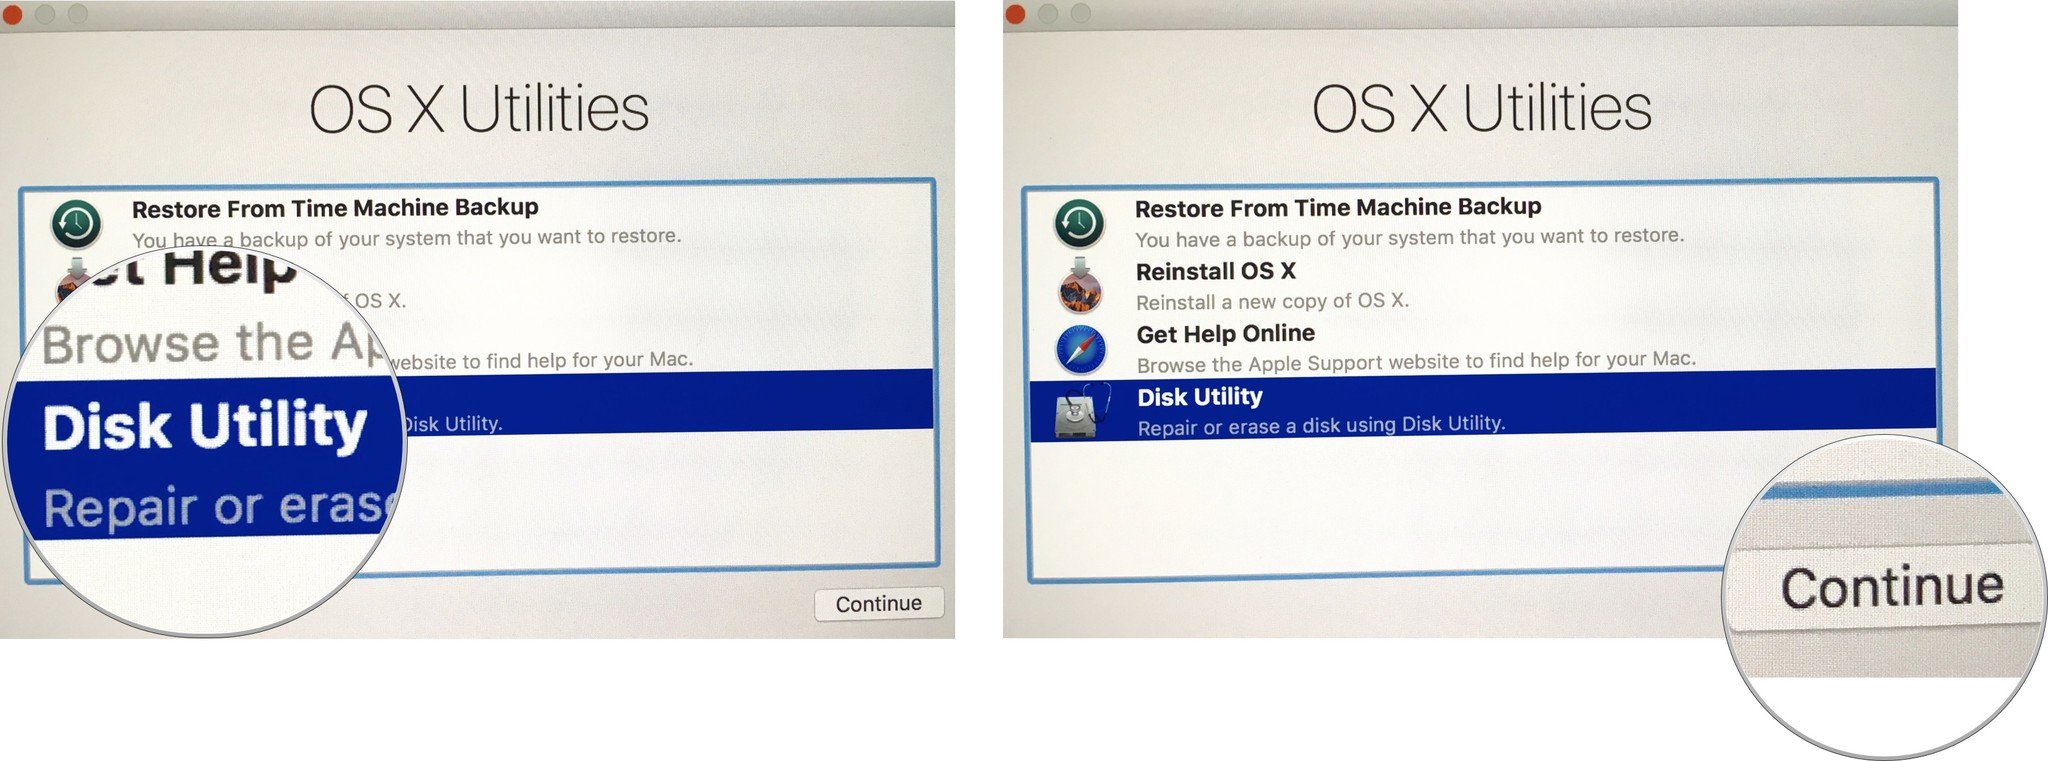 Seleting Disk Utilities from the OS X Utilities Selector